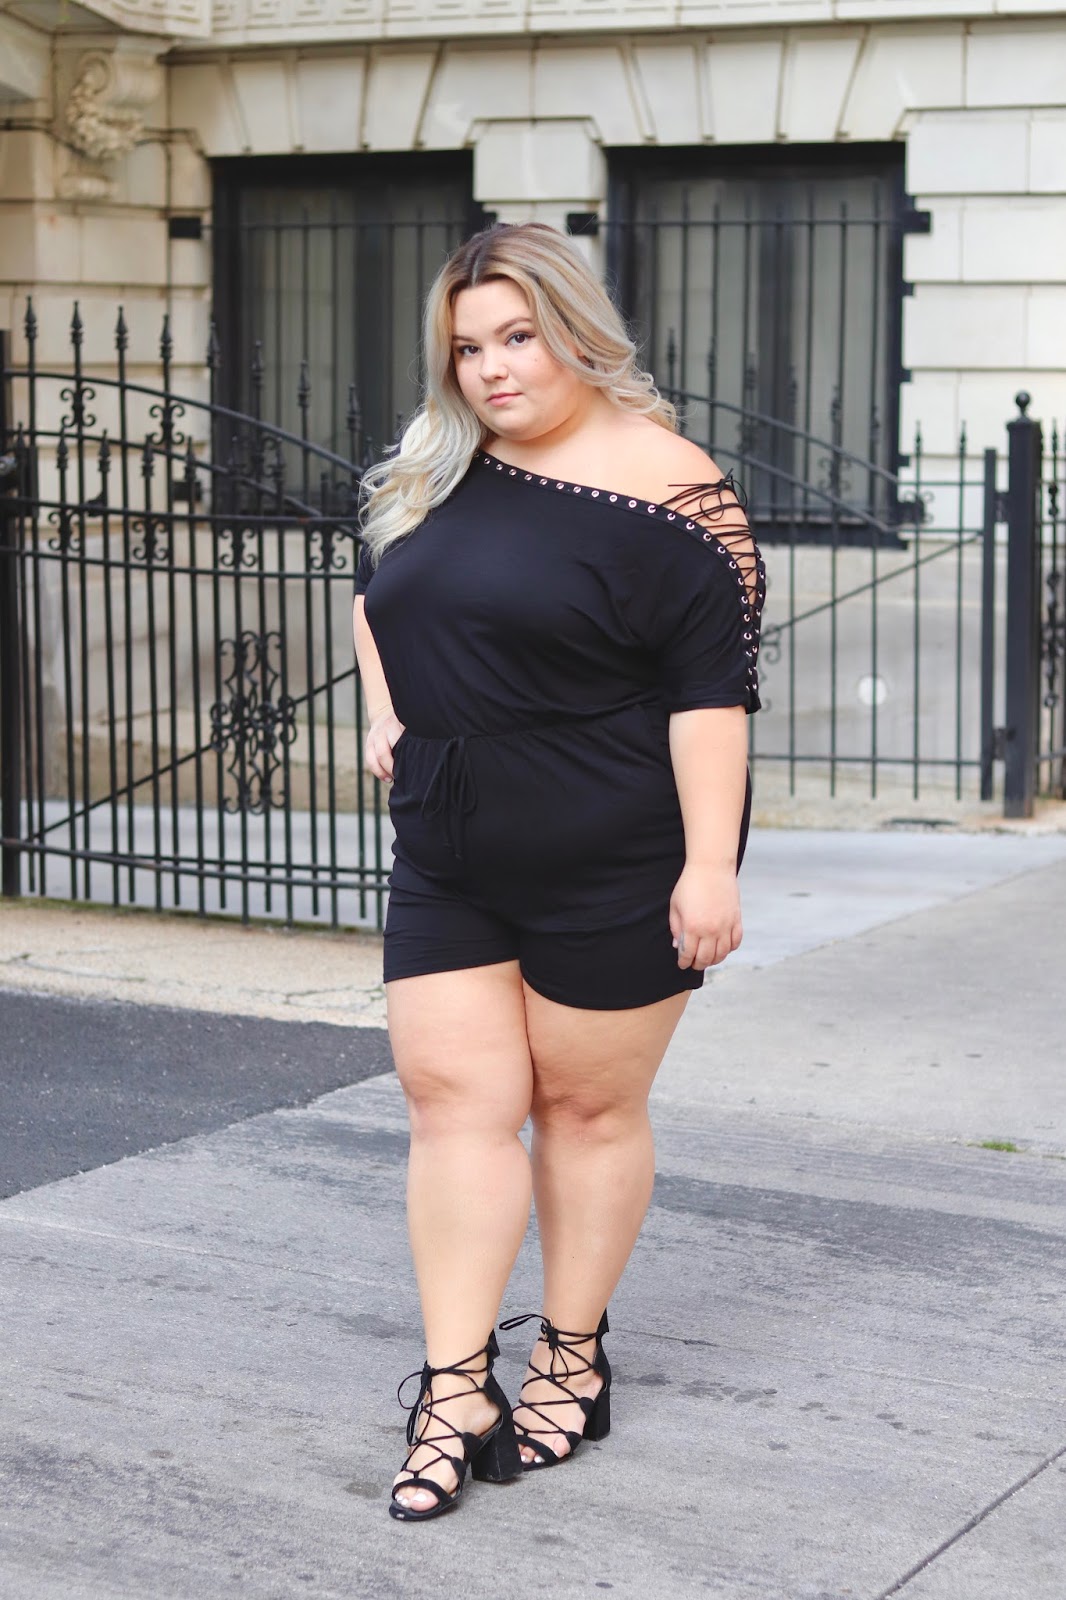 chicago plus size fashion blogger, Chicago fashion blogger, Natalie in the city, Natalie Craig, plus size fashion, affordable plus size clothing, plus size rompers, fashion nova, fashion nova curve, blogger review, curves and confidence, efficiency your body standards, plus size model, Chicago plus size model, curve model, street style, lace up trend